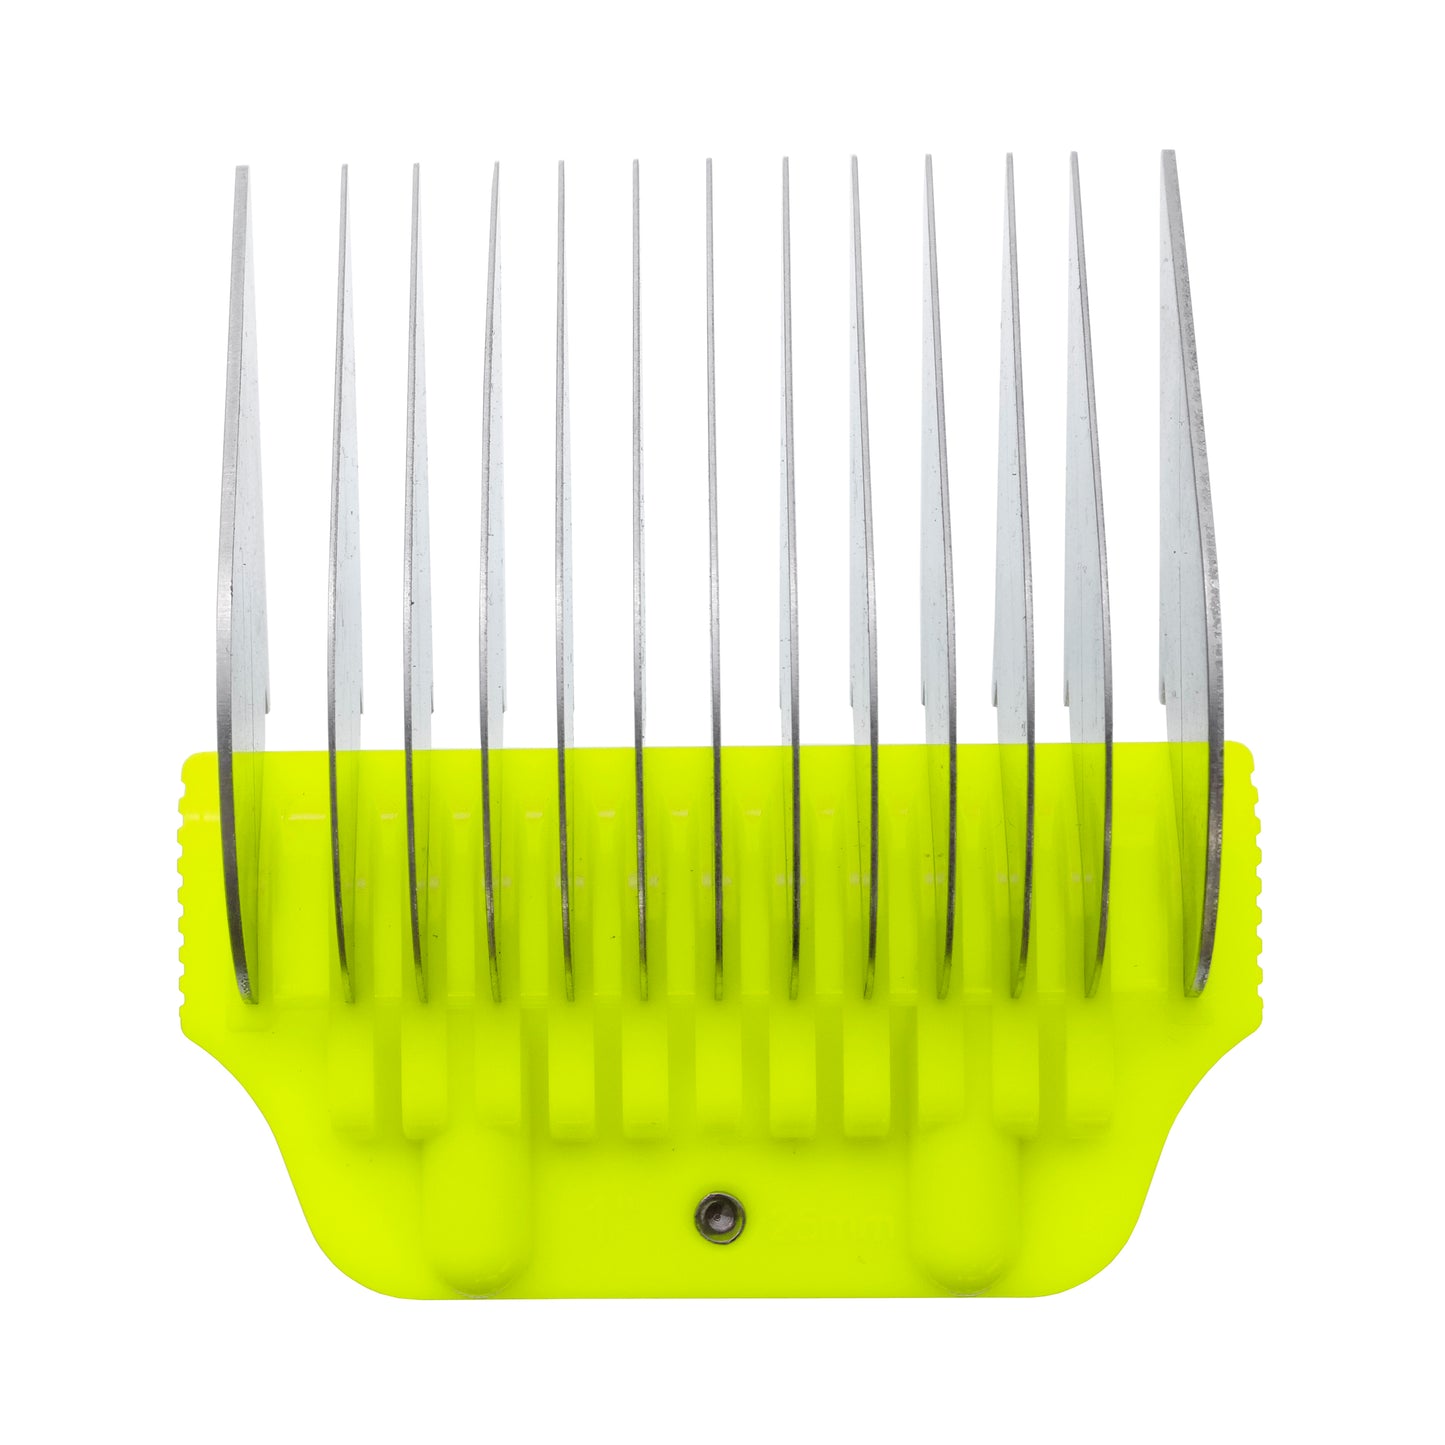 The Artero Wide Snap-On Metal Comb 25mm - 1" is designed for use with the Artero A5 Wide clipper blade and offers a smooth, even finish. This comb is also compatible with Andis, Moser, Heiniger, Oster, and Aesculap Fav5 and Fav5 CL blades. Features: Cutting height: 1" Metal Construction Fits A5 Clippers